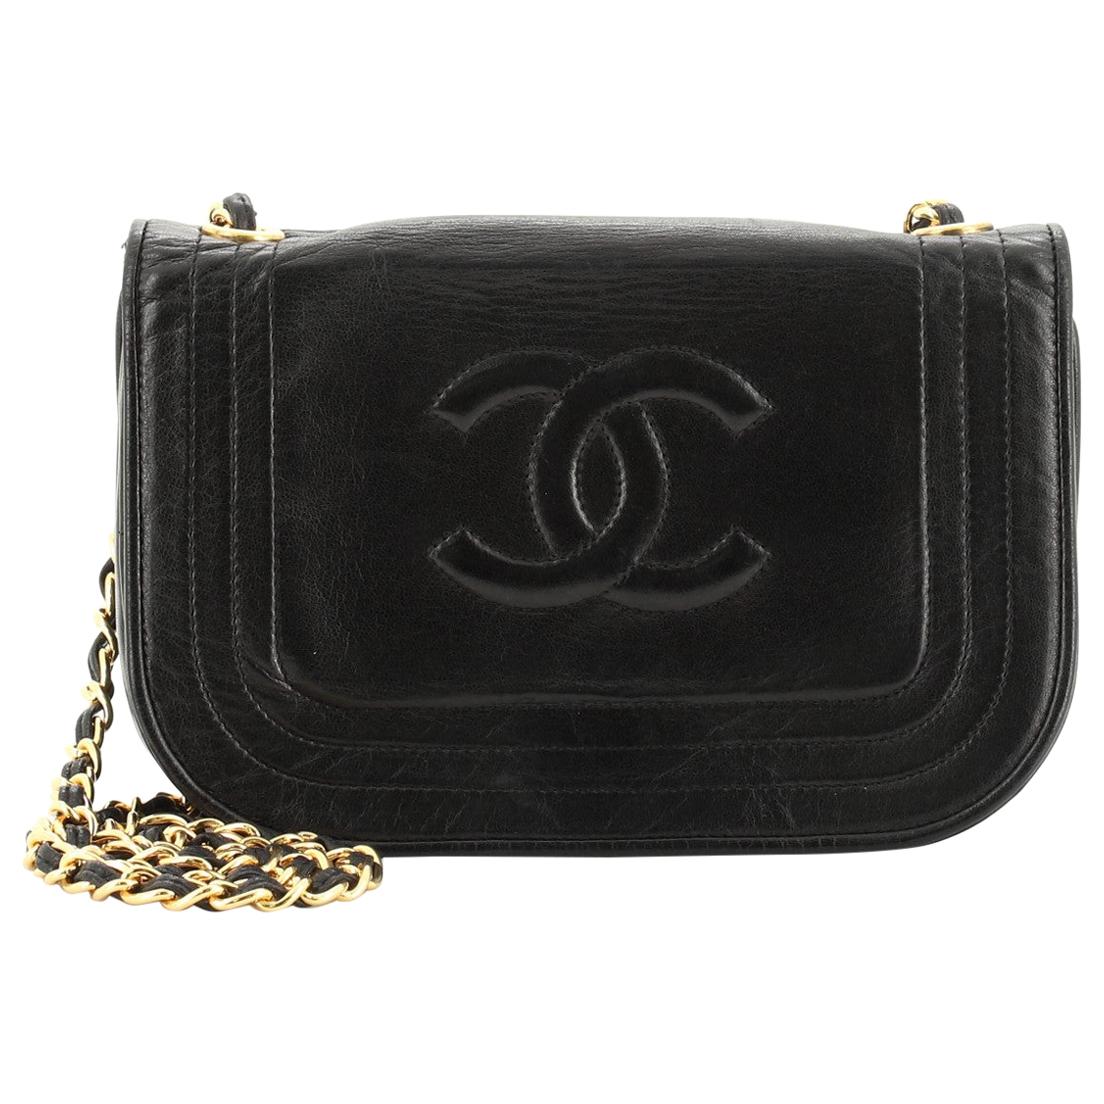 Sold at Auction: COUTURE. Rare Chanel Strass Flap Mini Bag.